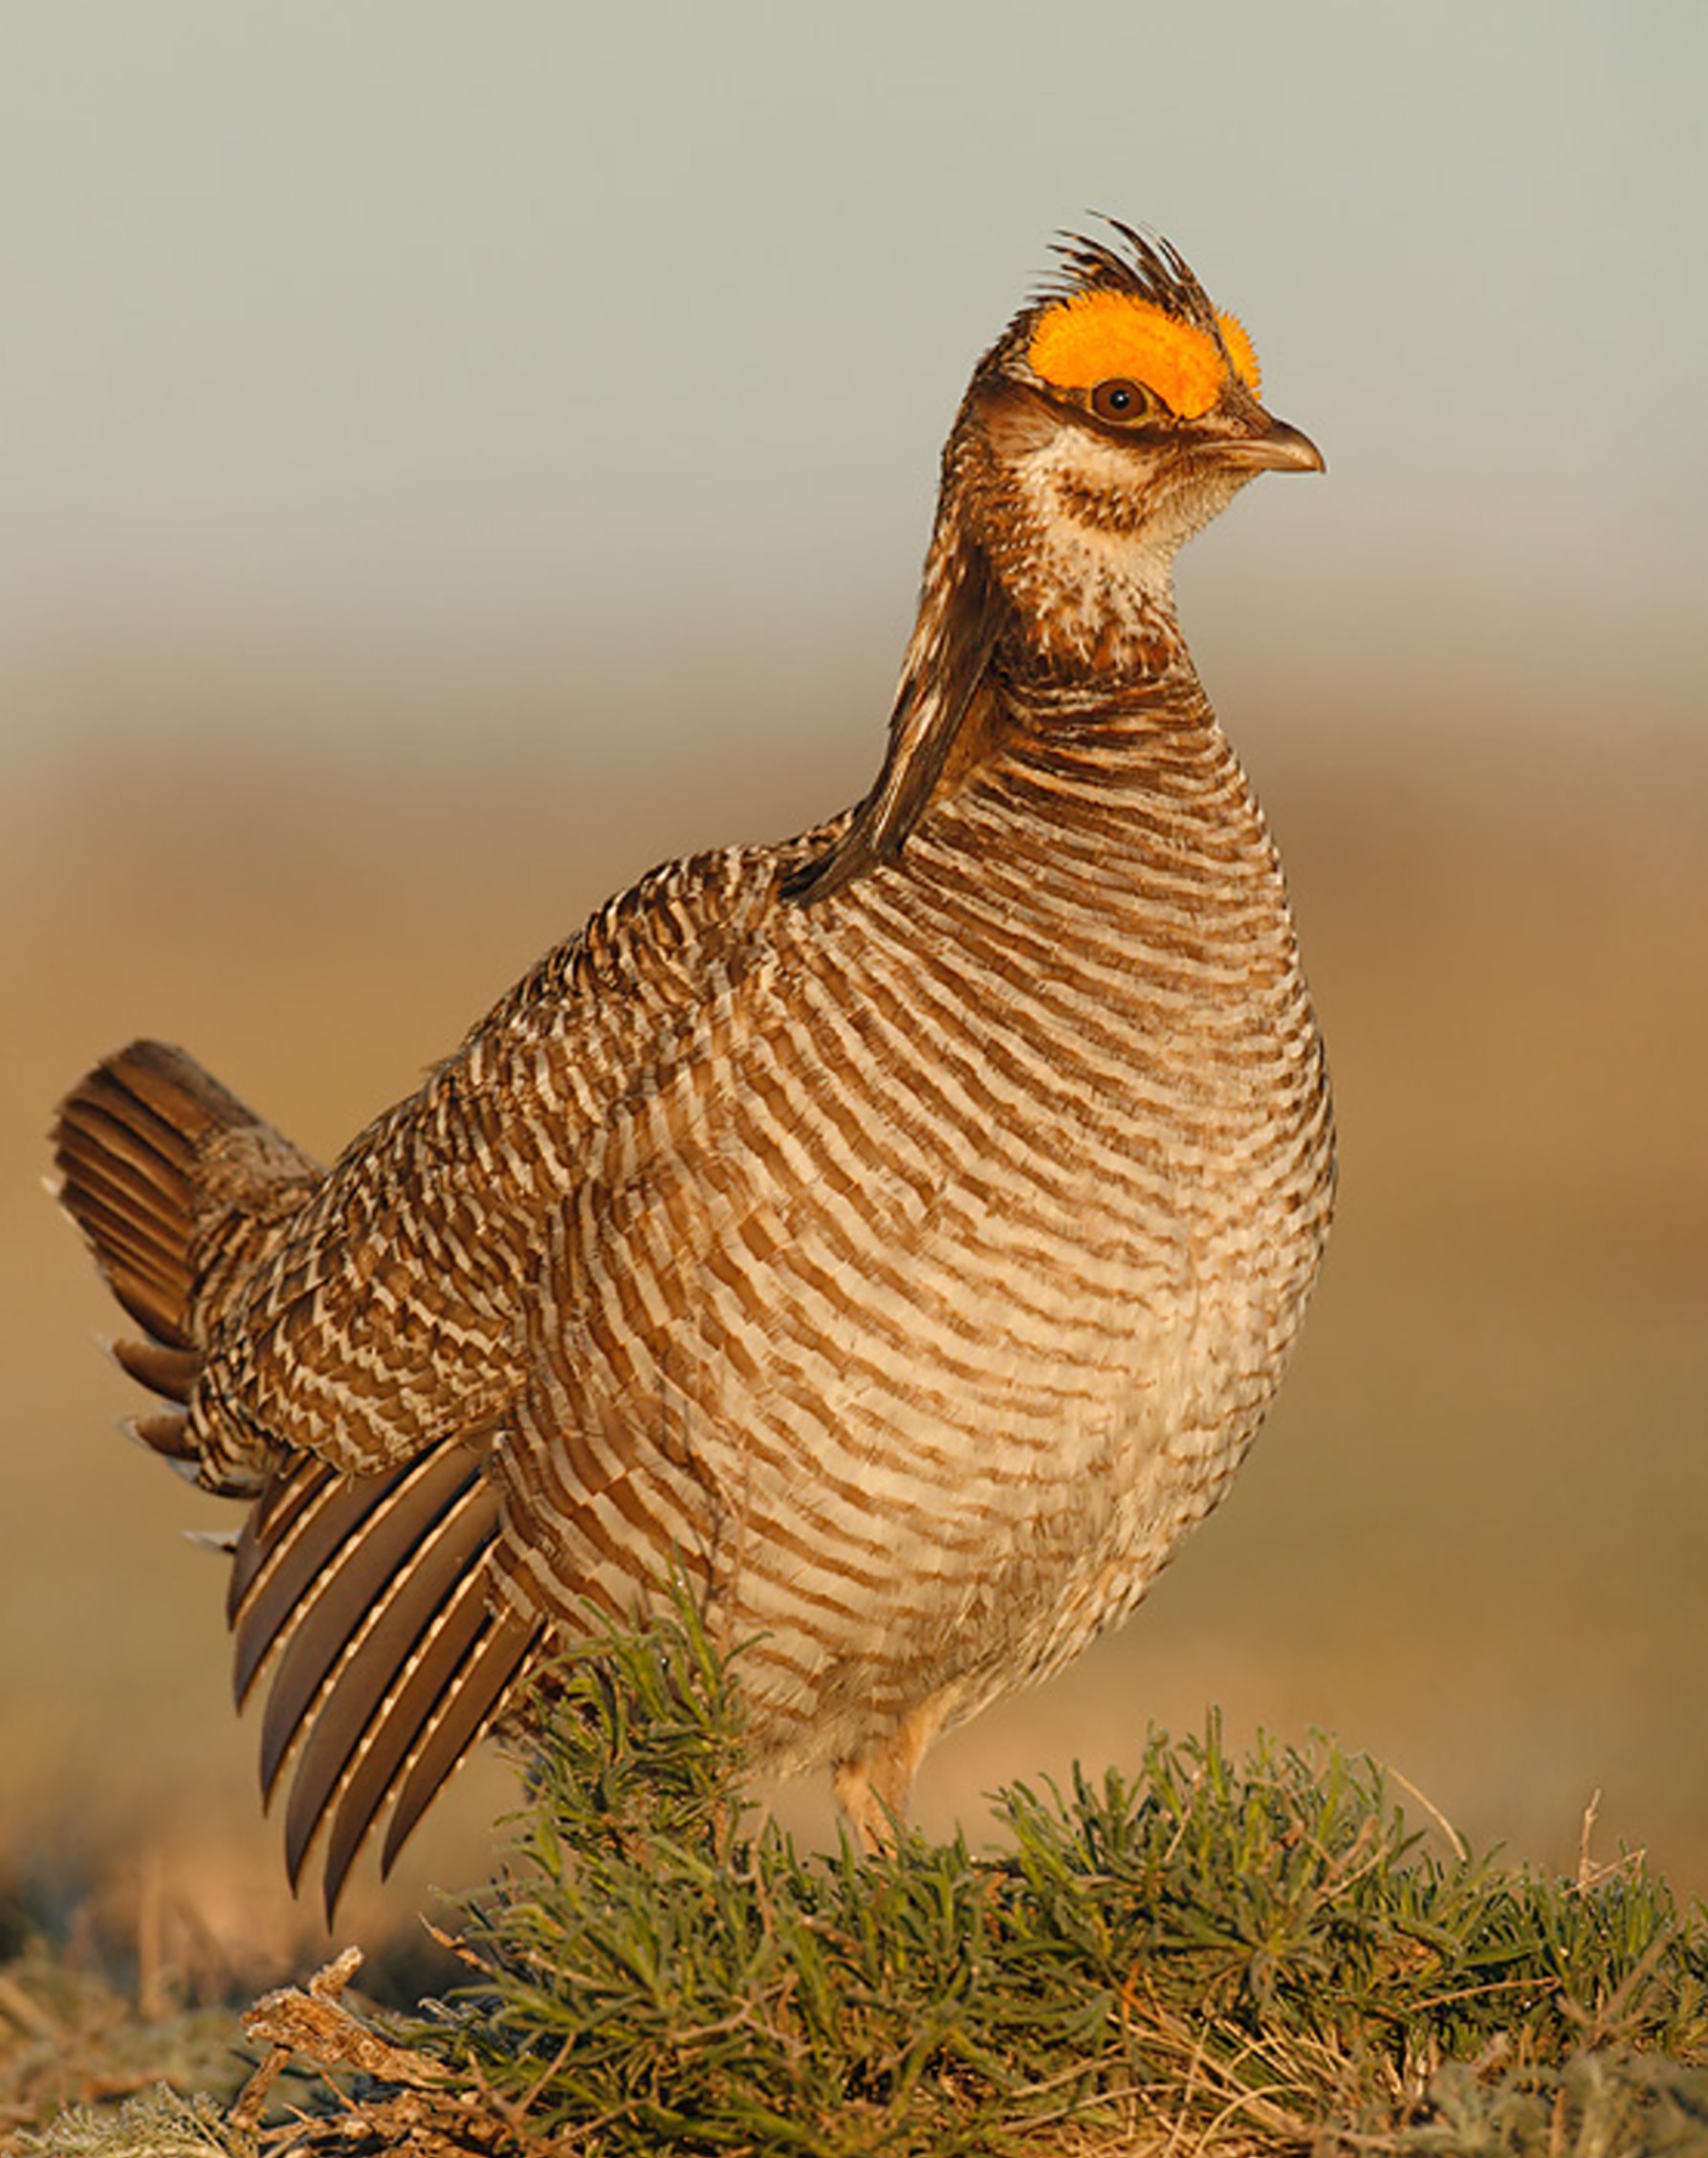 Governor Mary Fallin Cautious in Lesser Prairie Chicken Reaction- Hopeful Conservation Plan Works